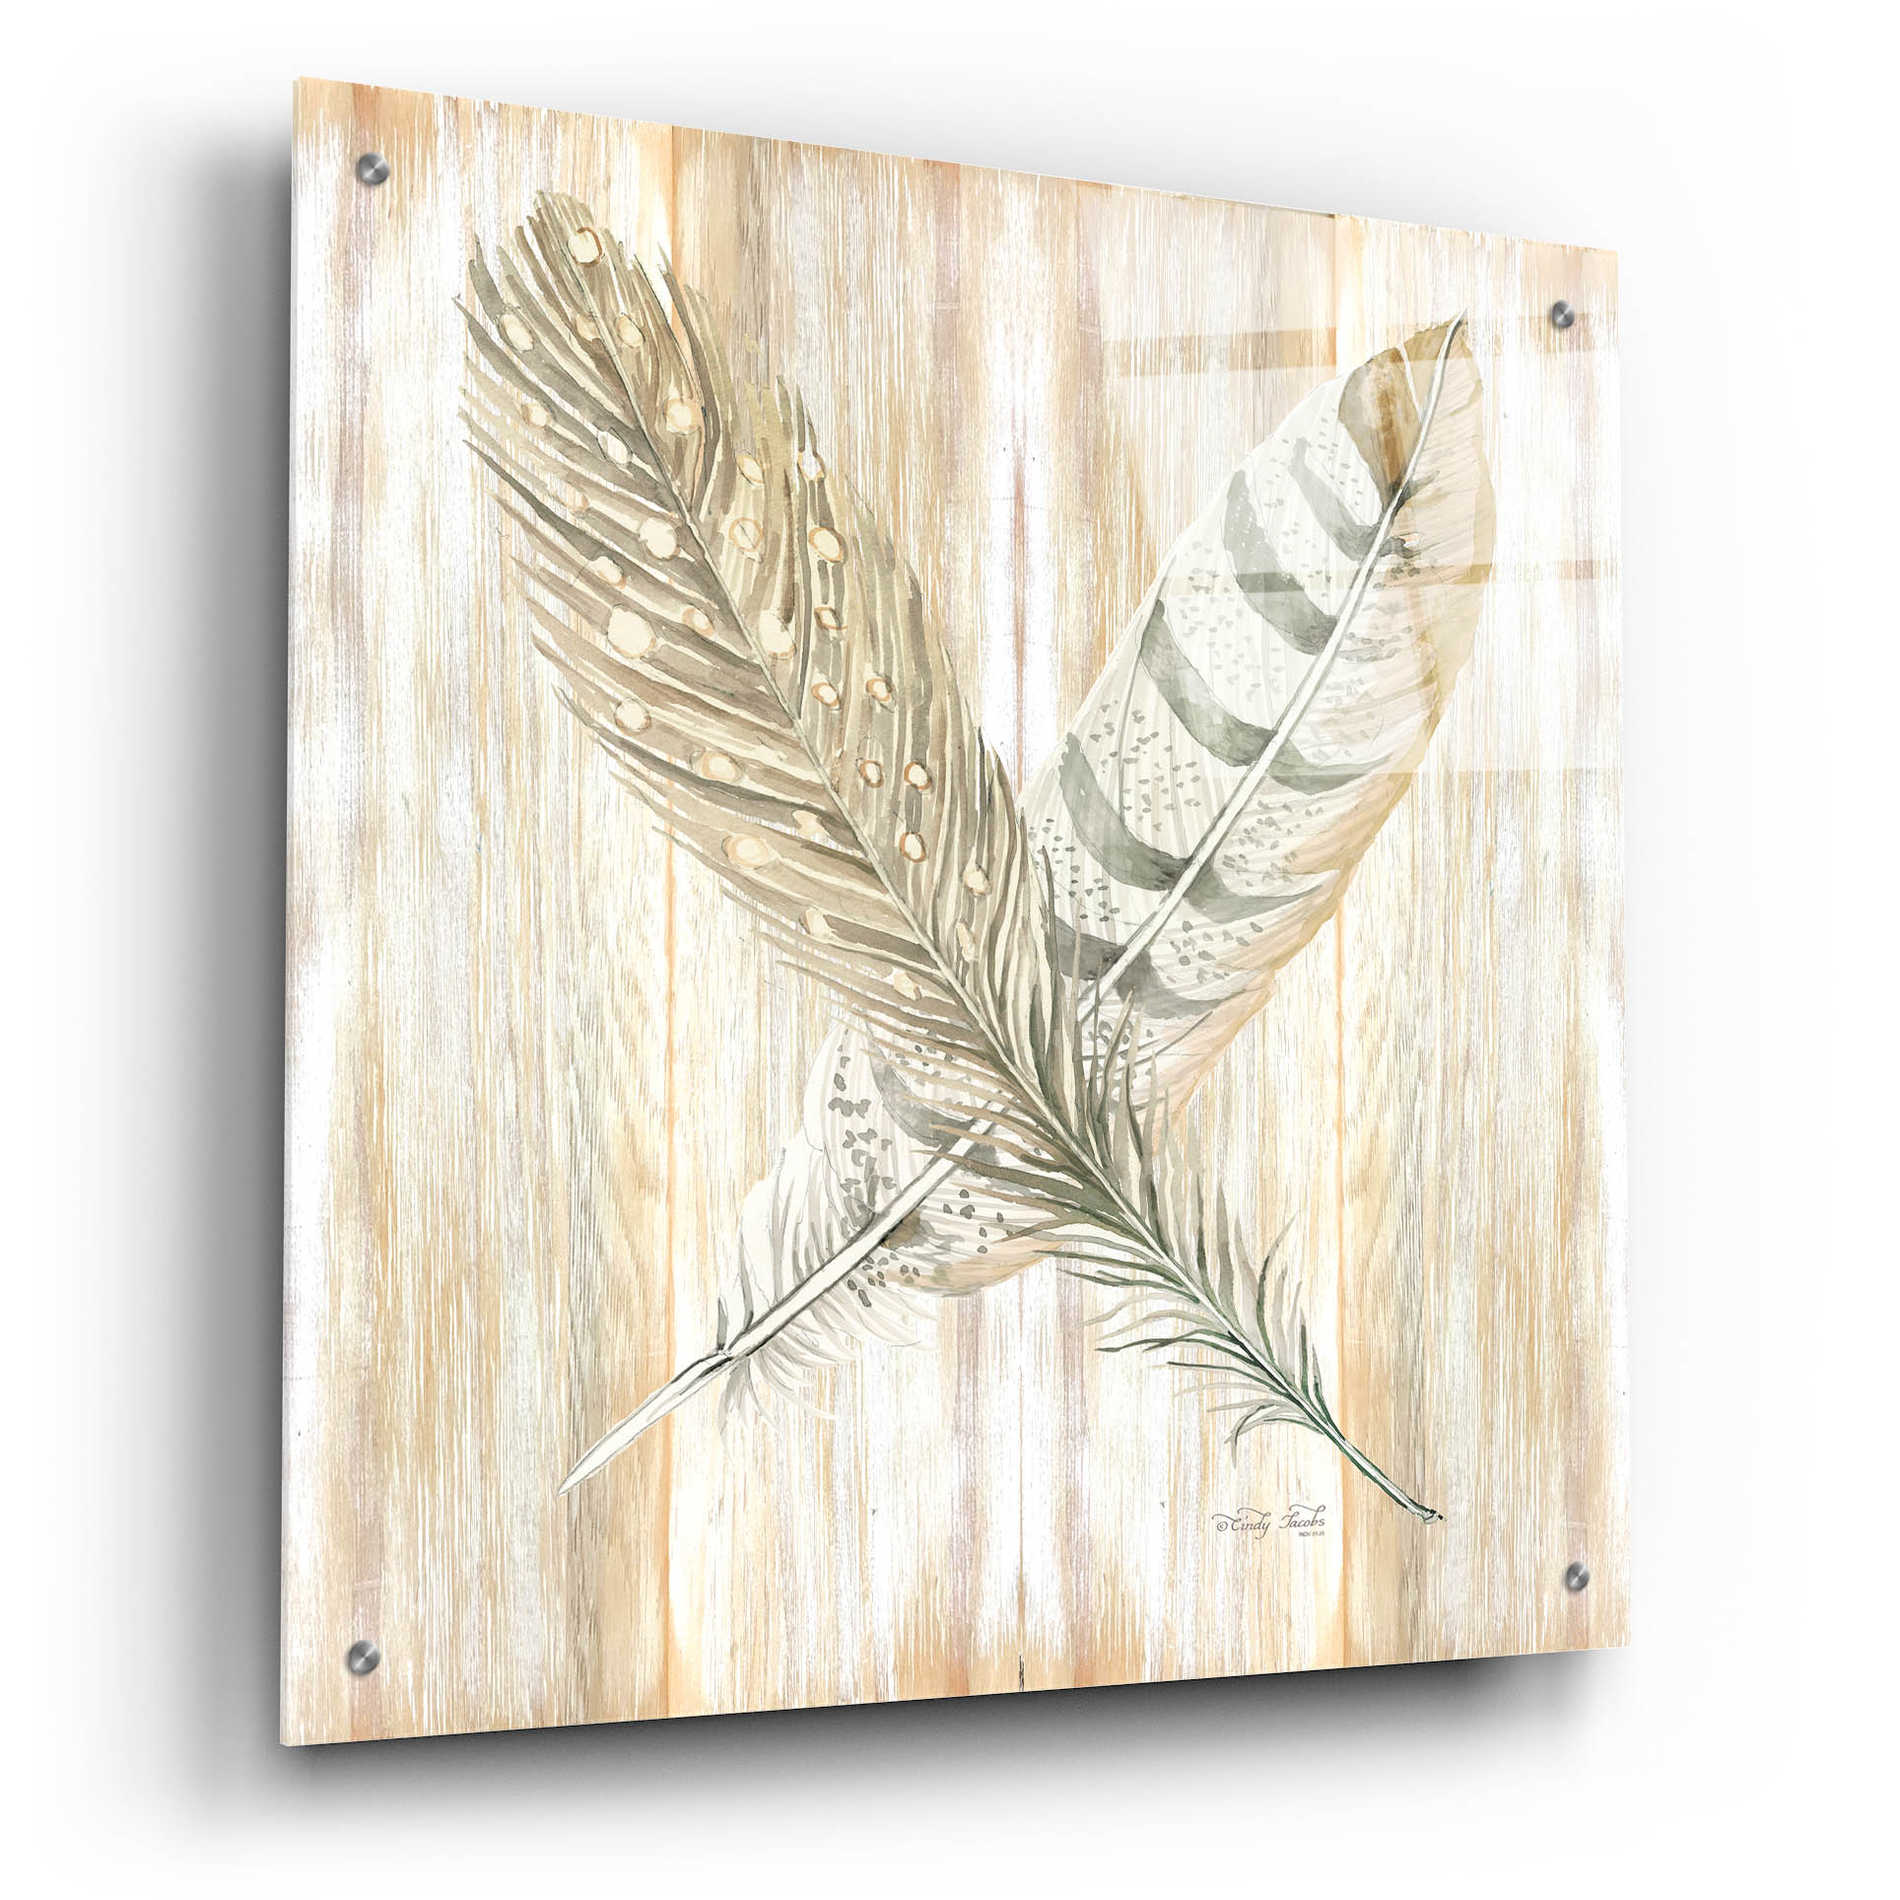 Epic Art 'Feathers Crossed II' by Cindy Jacobs, Acrylic Glass Wall Art,24x24